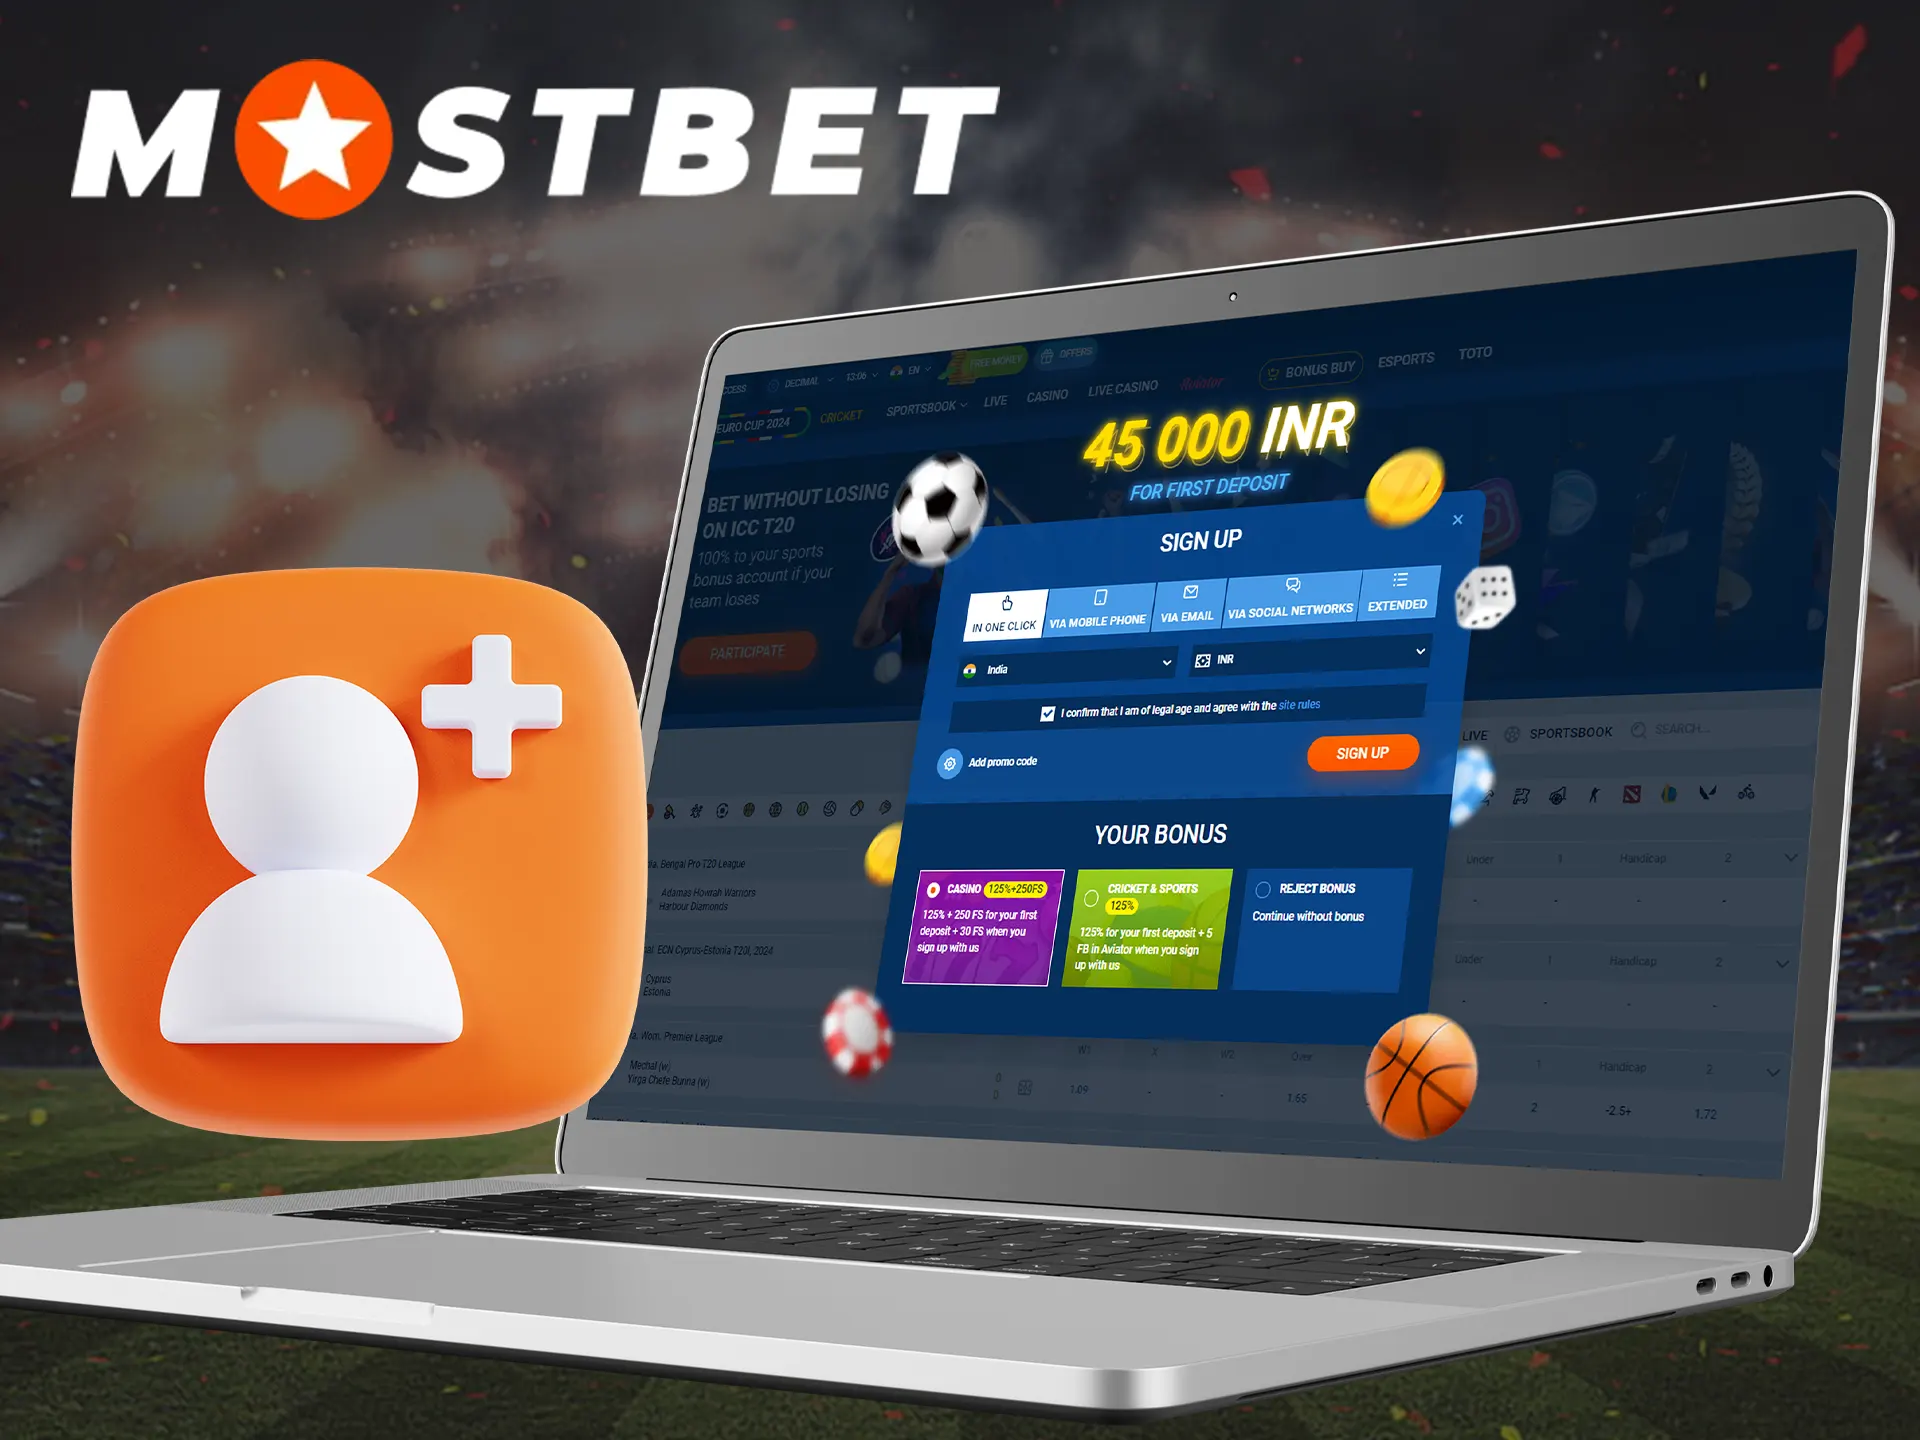 Go through Mostbet registration to bet on football.